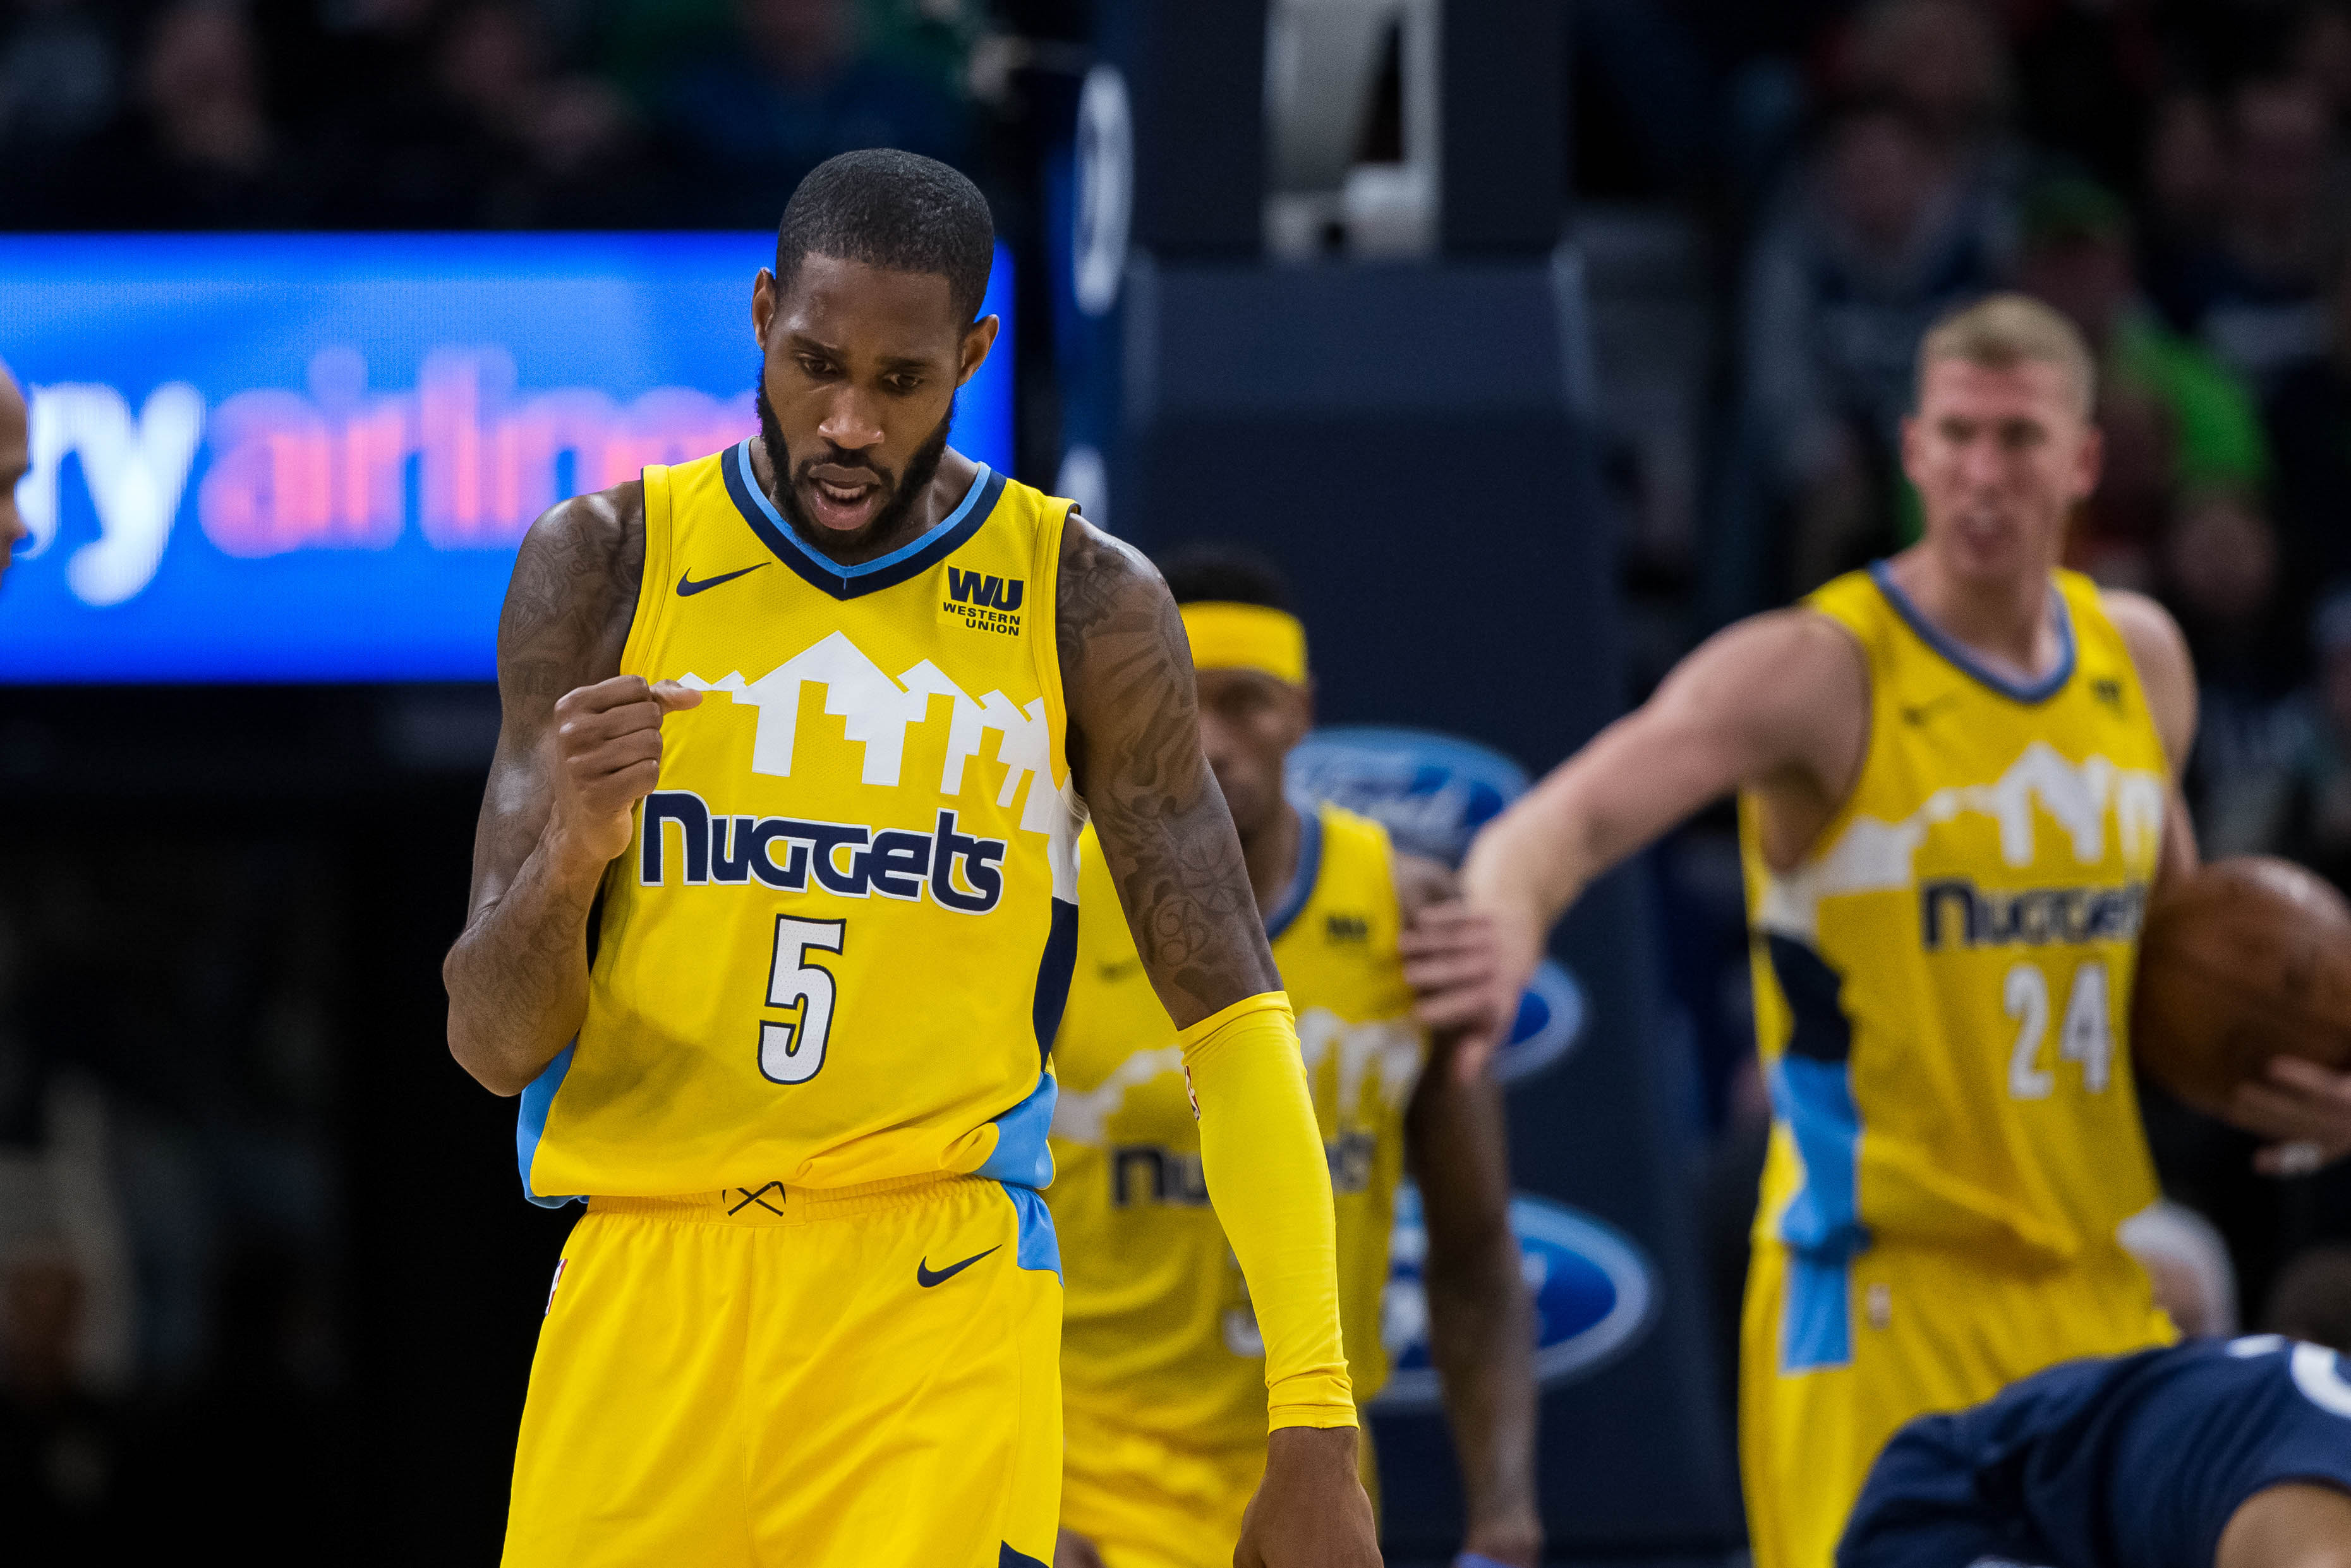 denver nuggets schedule january 2018